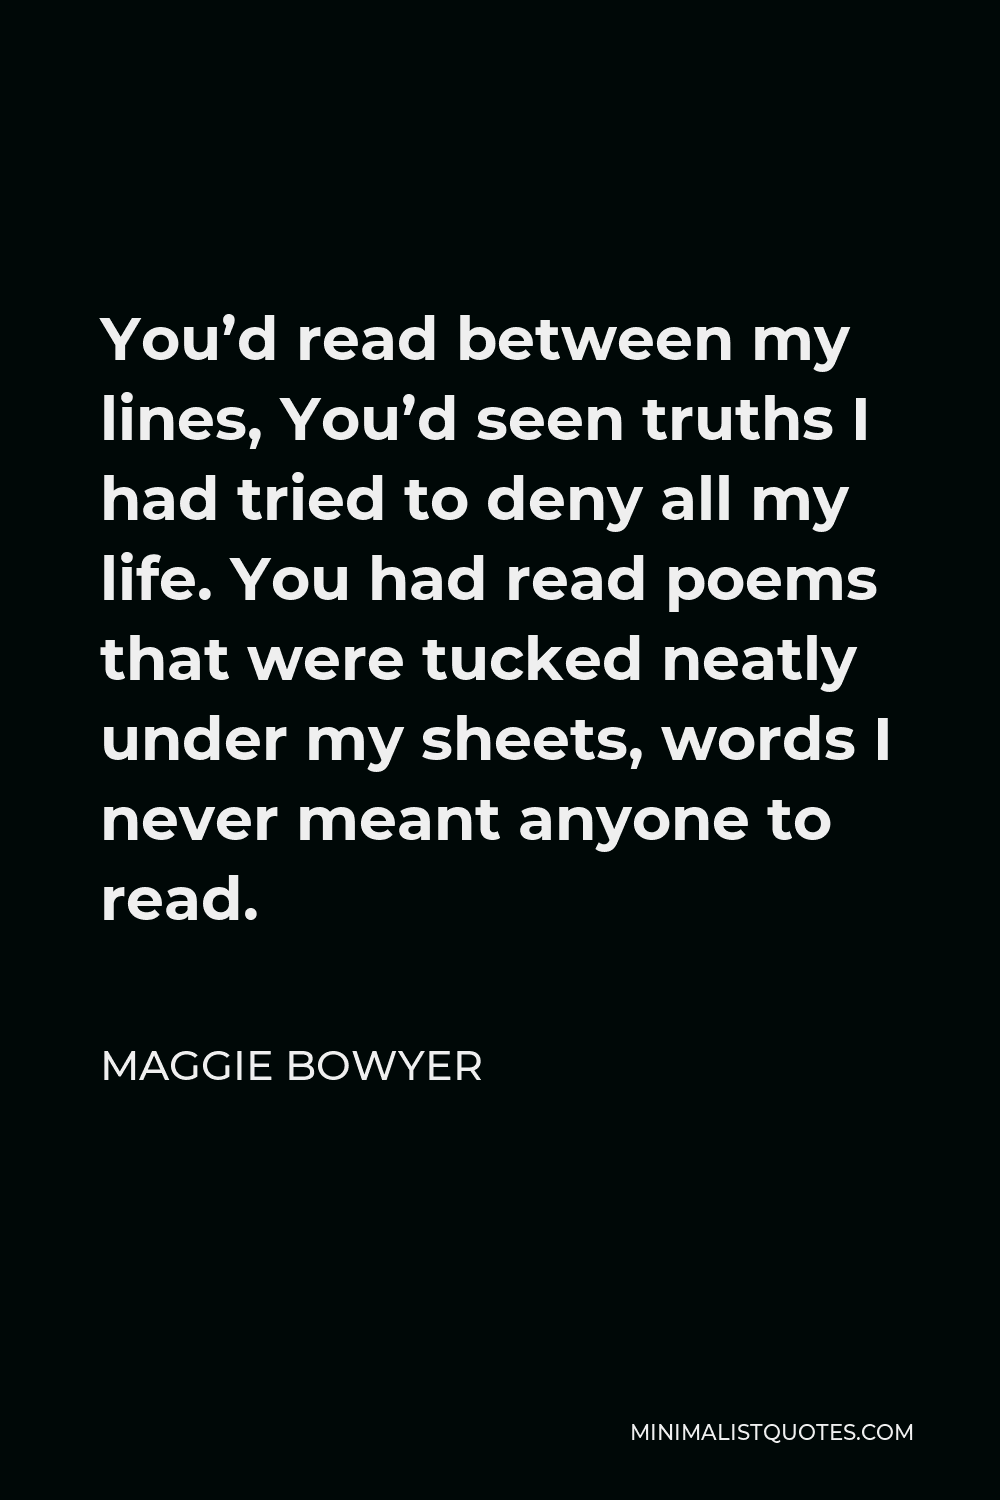 Maggie Bowyer Quote - You’d read between my lines, You’d seen truths I had tried to deny all my life. You had read poems that were tucked neatly under my sheets, words I never meant anyone to read.